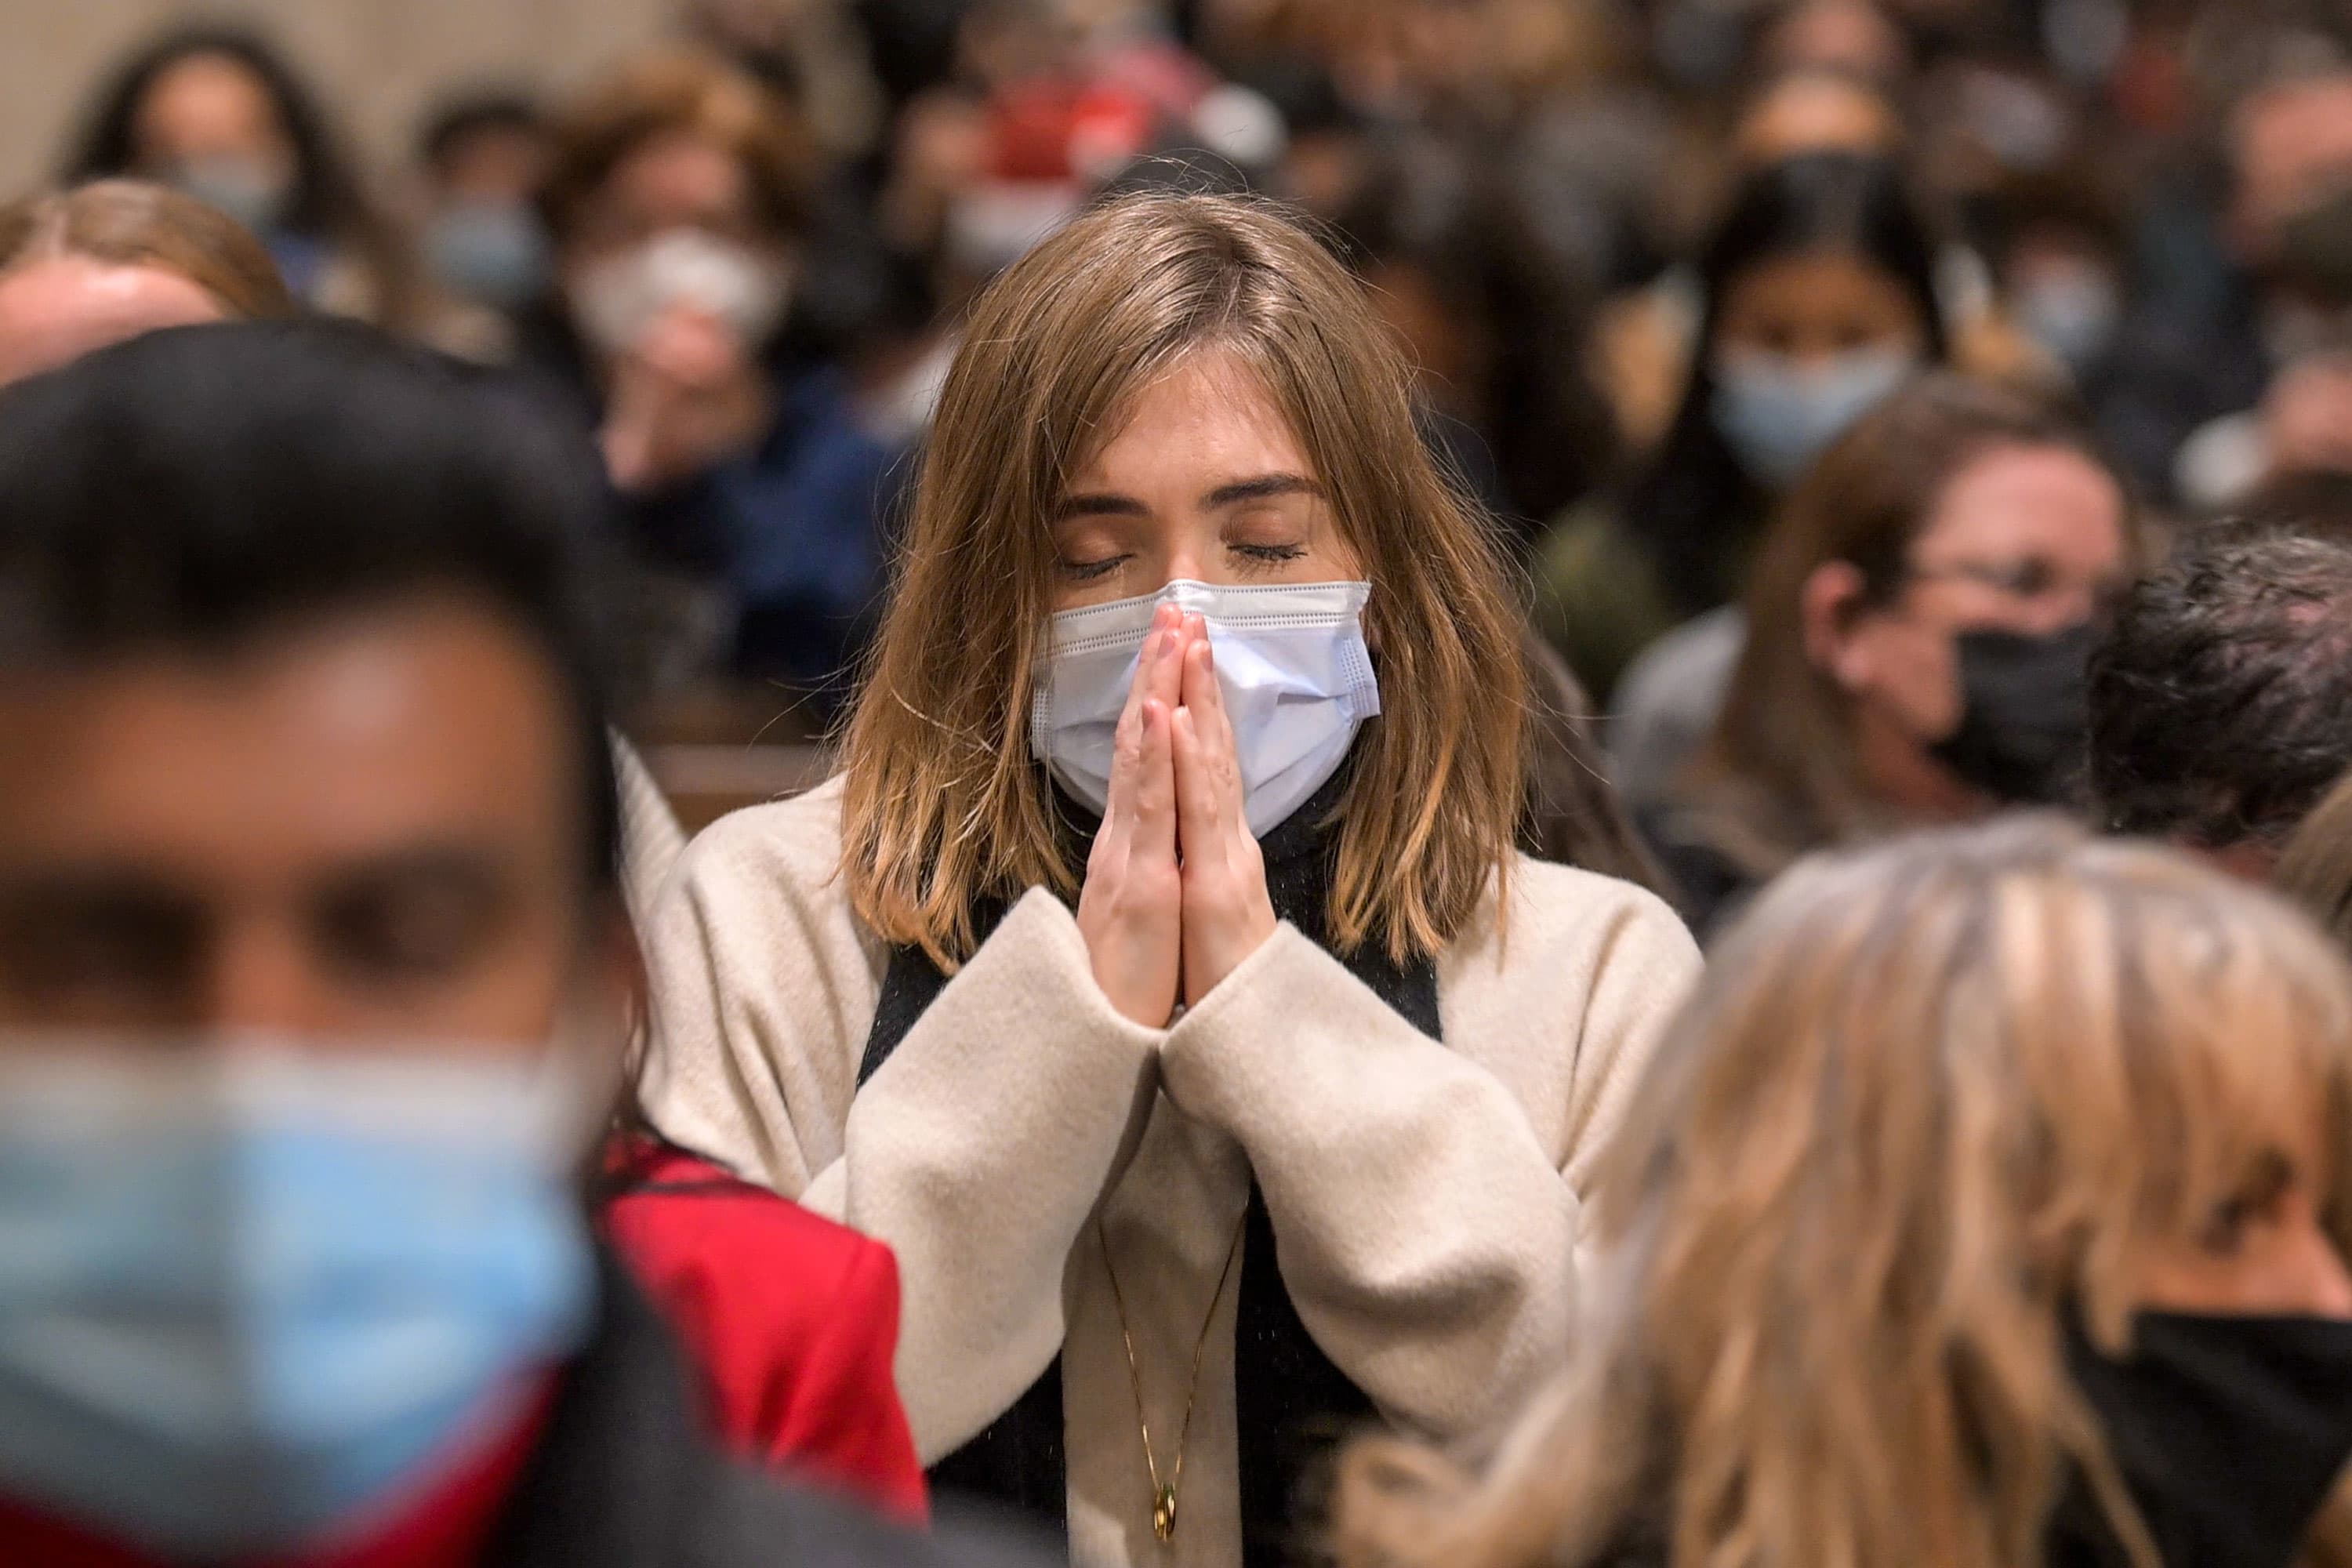 Millennials lead shift away from organized religion as pandemic tests Americans' faith